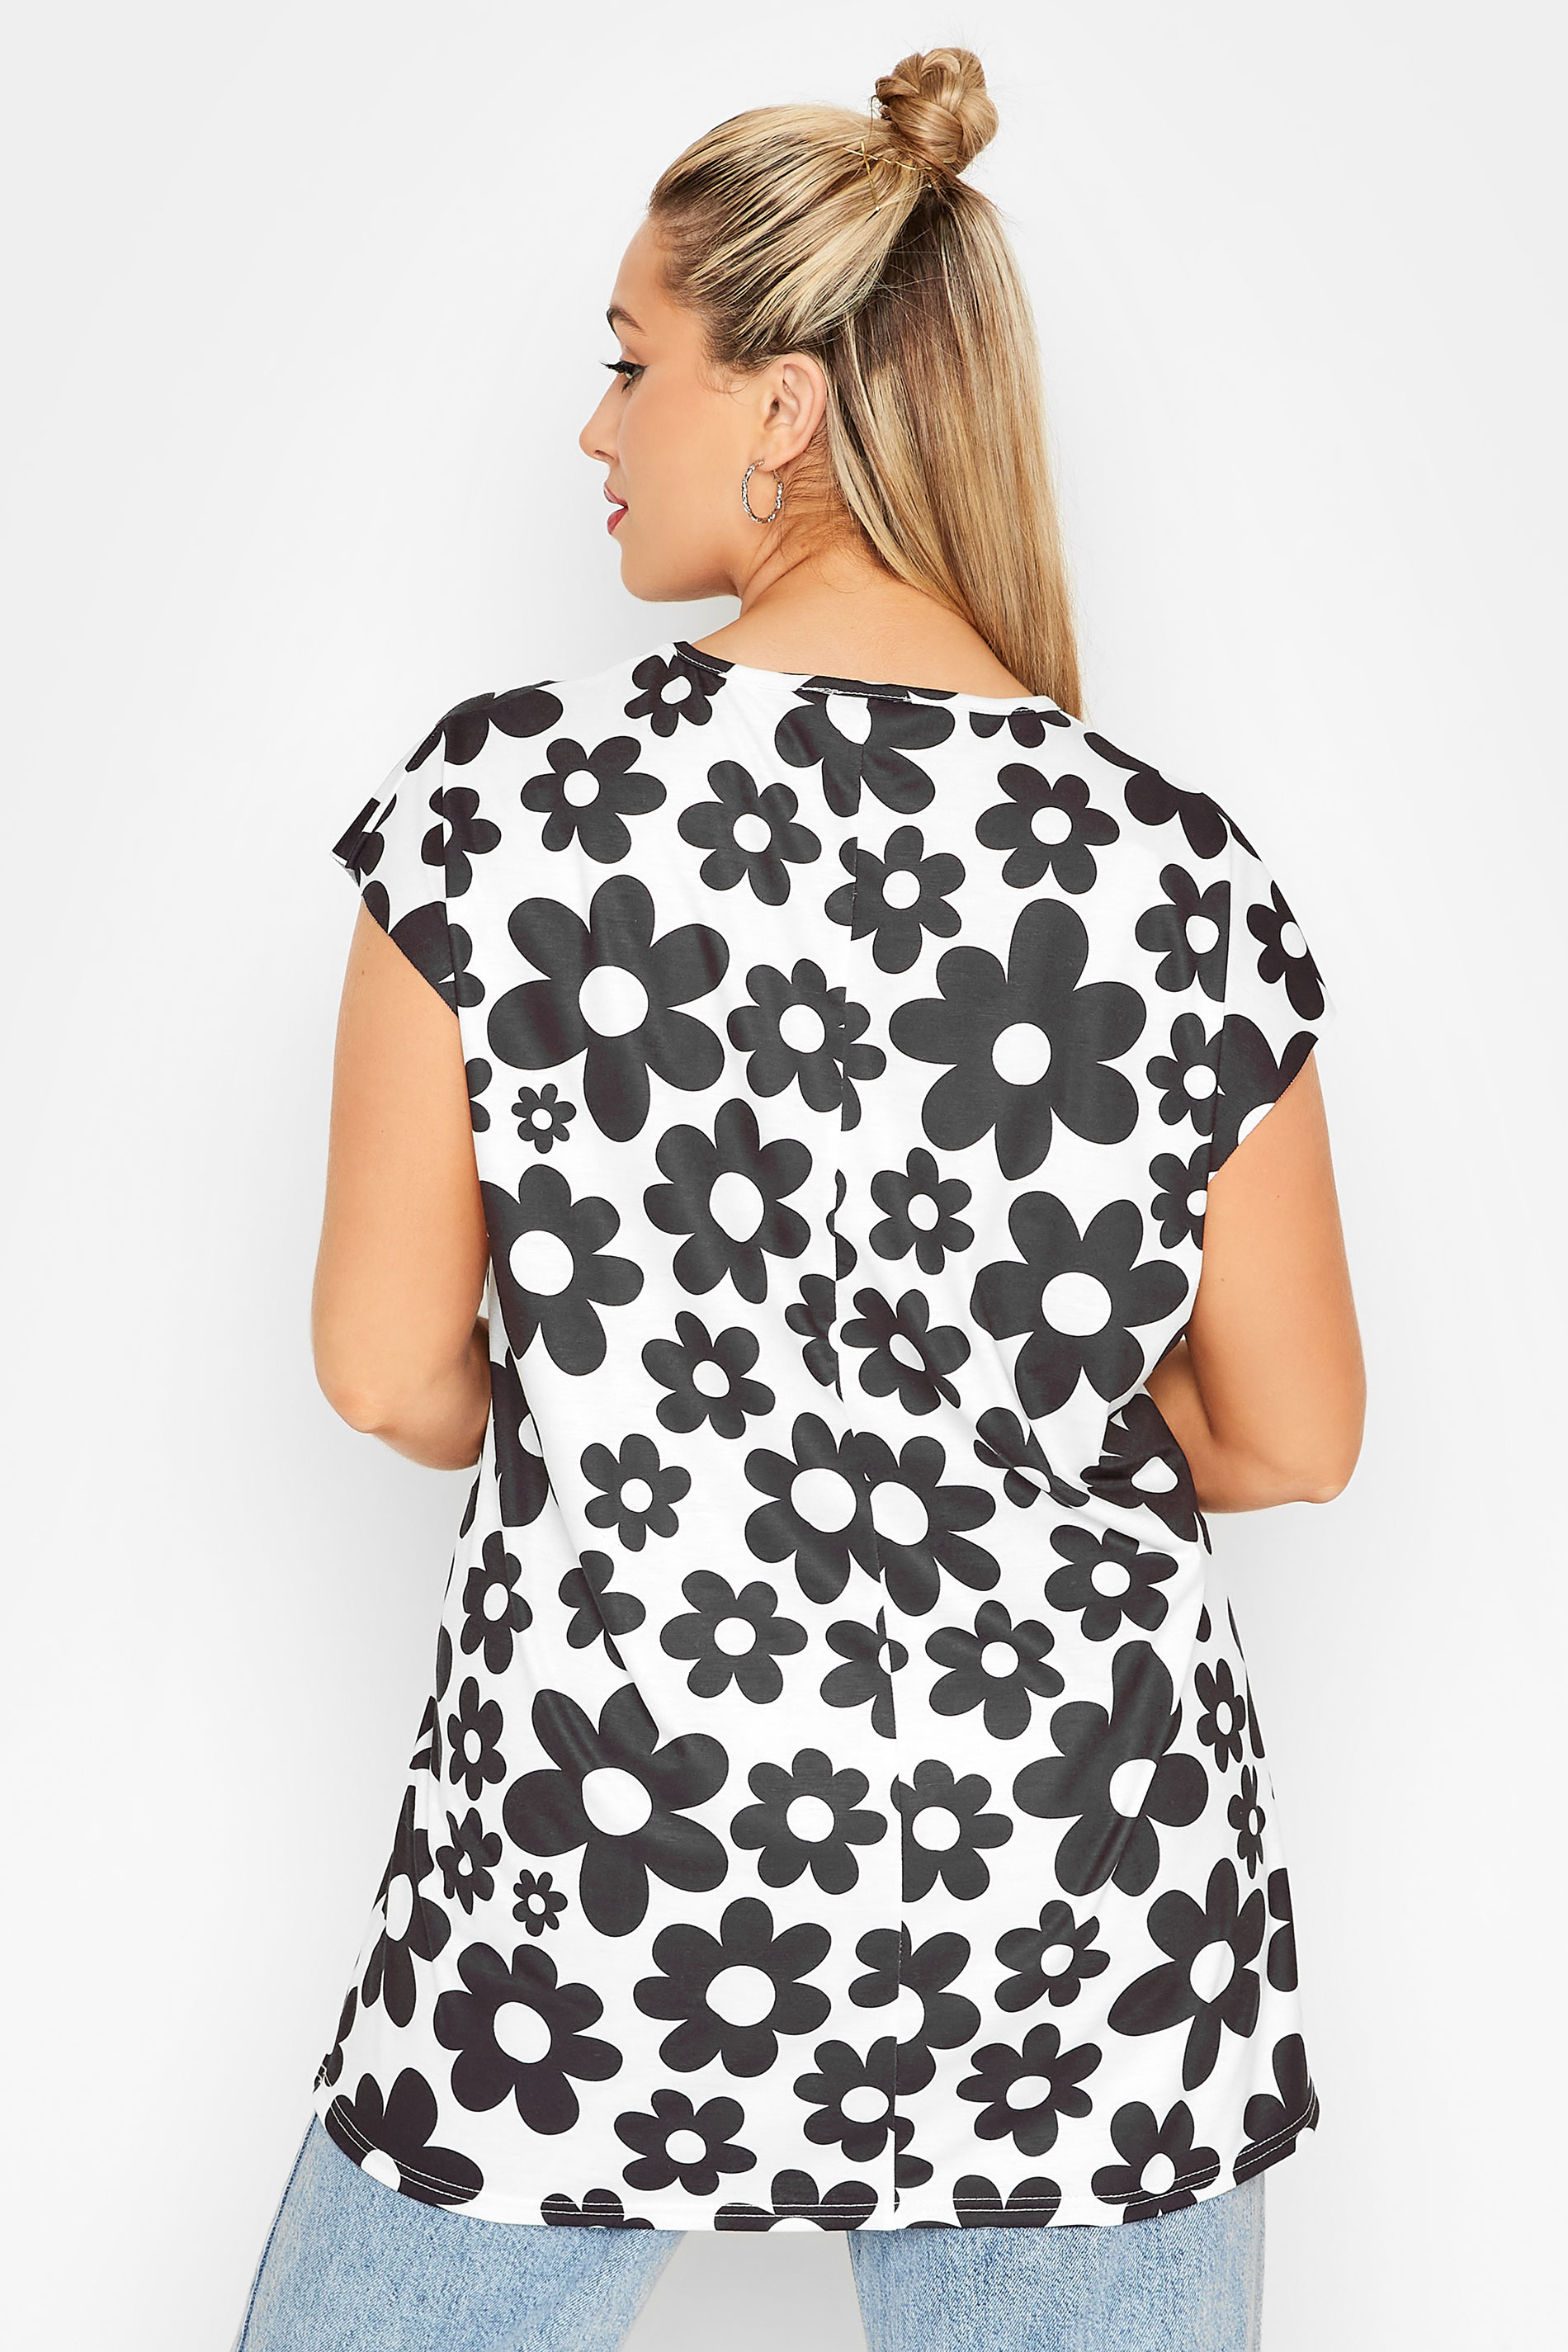 Grande taille  Tops Grande taille  Tops Jersey | LIMITED COLLECTION - T-Shirt Rétro Blanc Floral Noir - JV94163